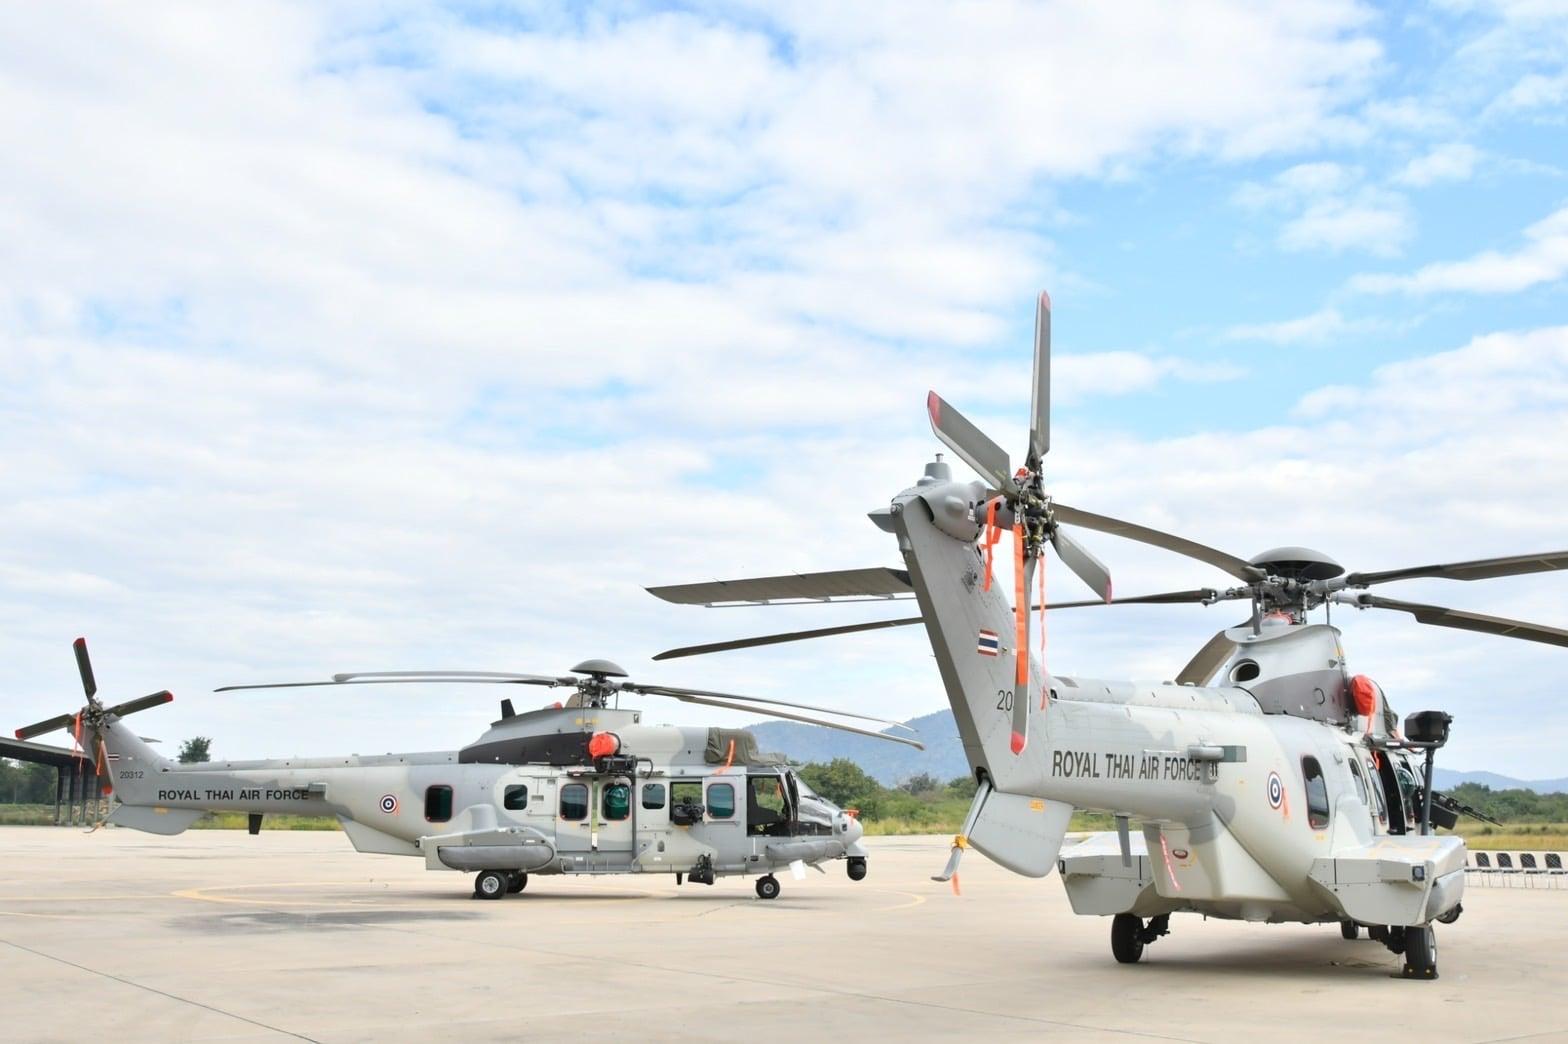 Royal Thai Air Force Takes Delivery of New Airbus H225M Tactical Transport Helicopters